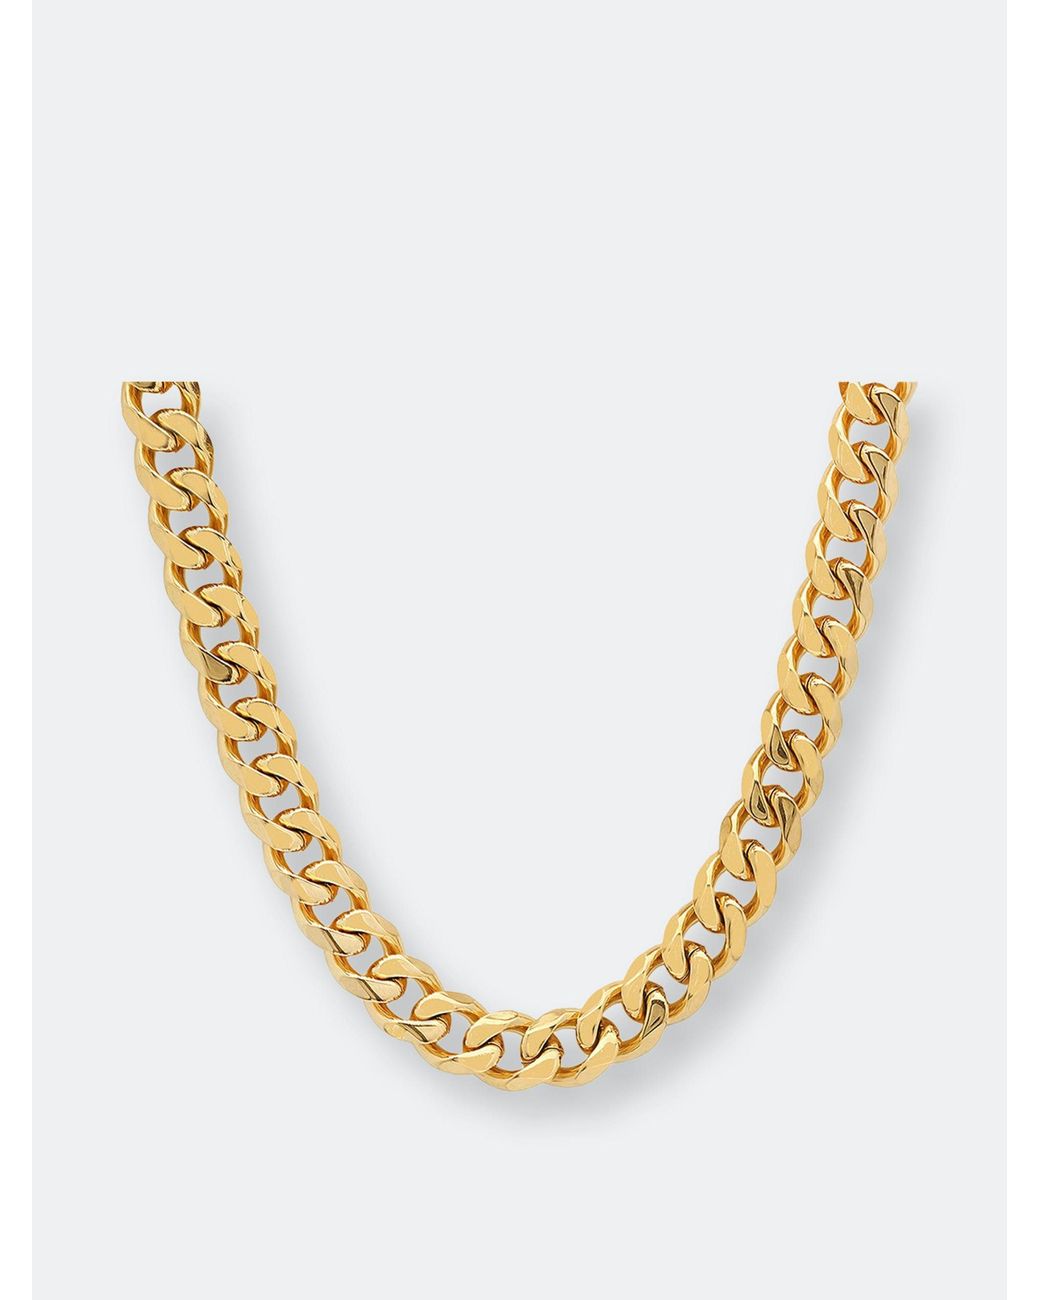 Steeltime 10mm Classic Cuban Link Chain Necklace in Metallic for Men | Lyst